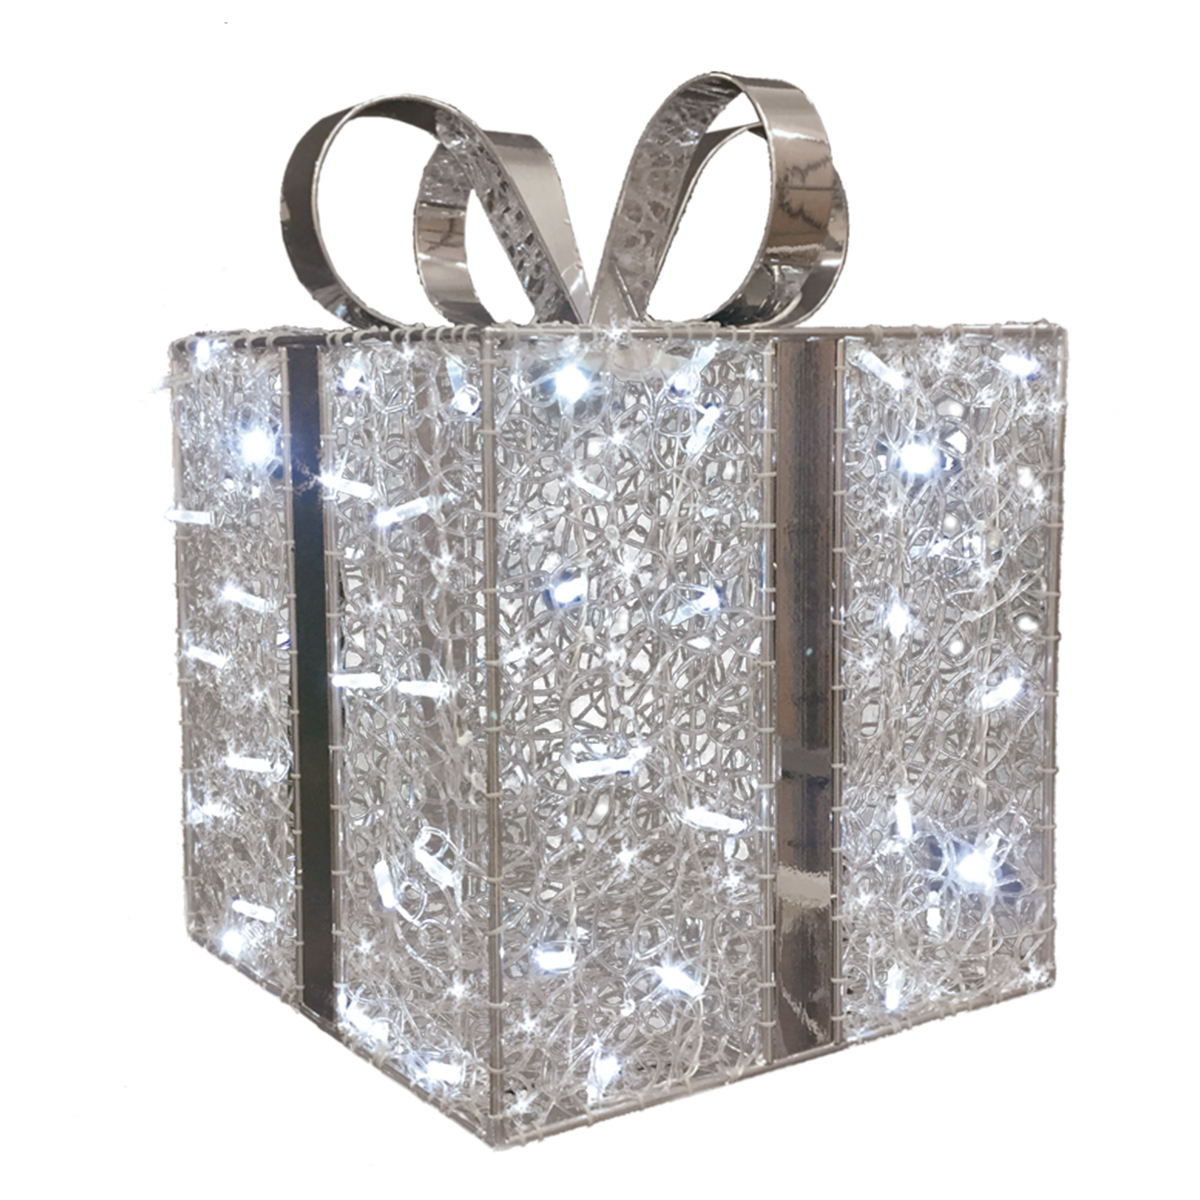 3D Square Gift Box - 2.2ft Tall - Christmas Display - Silver